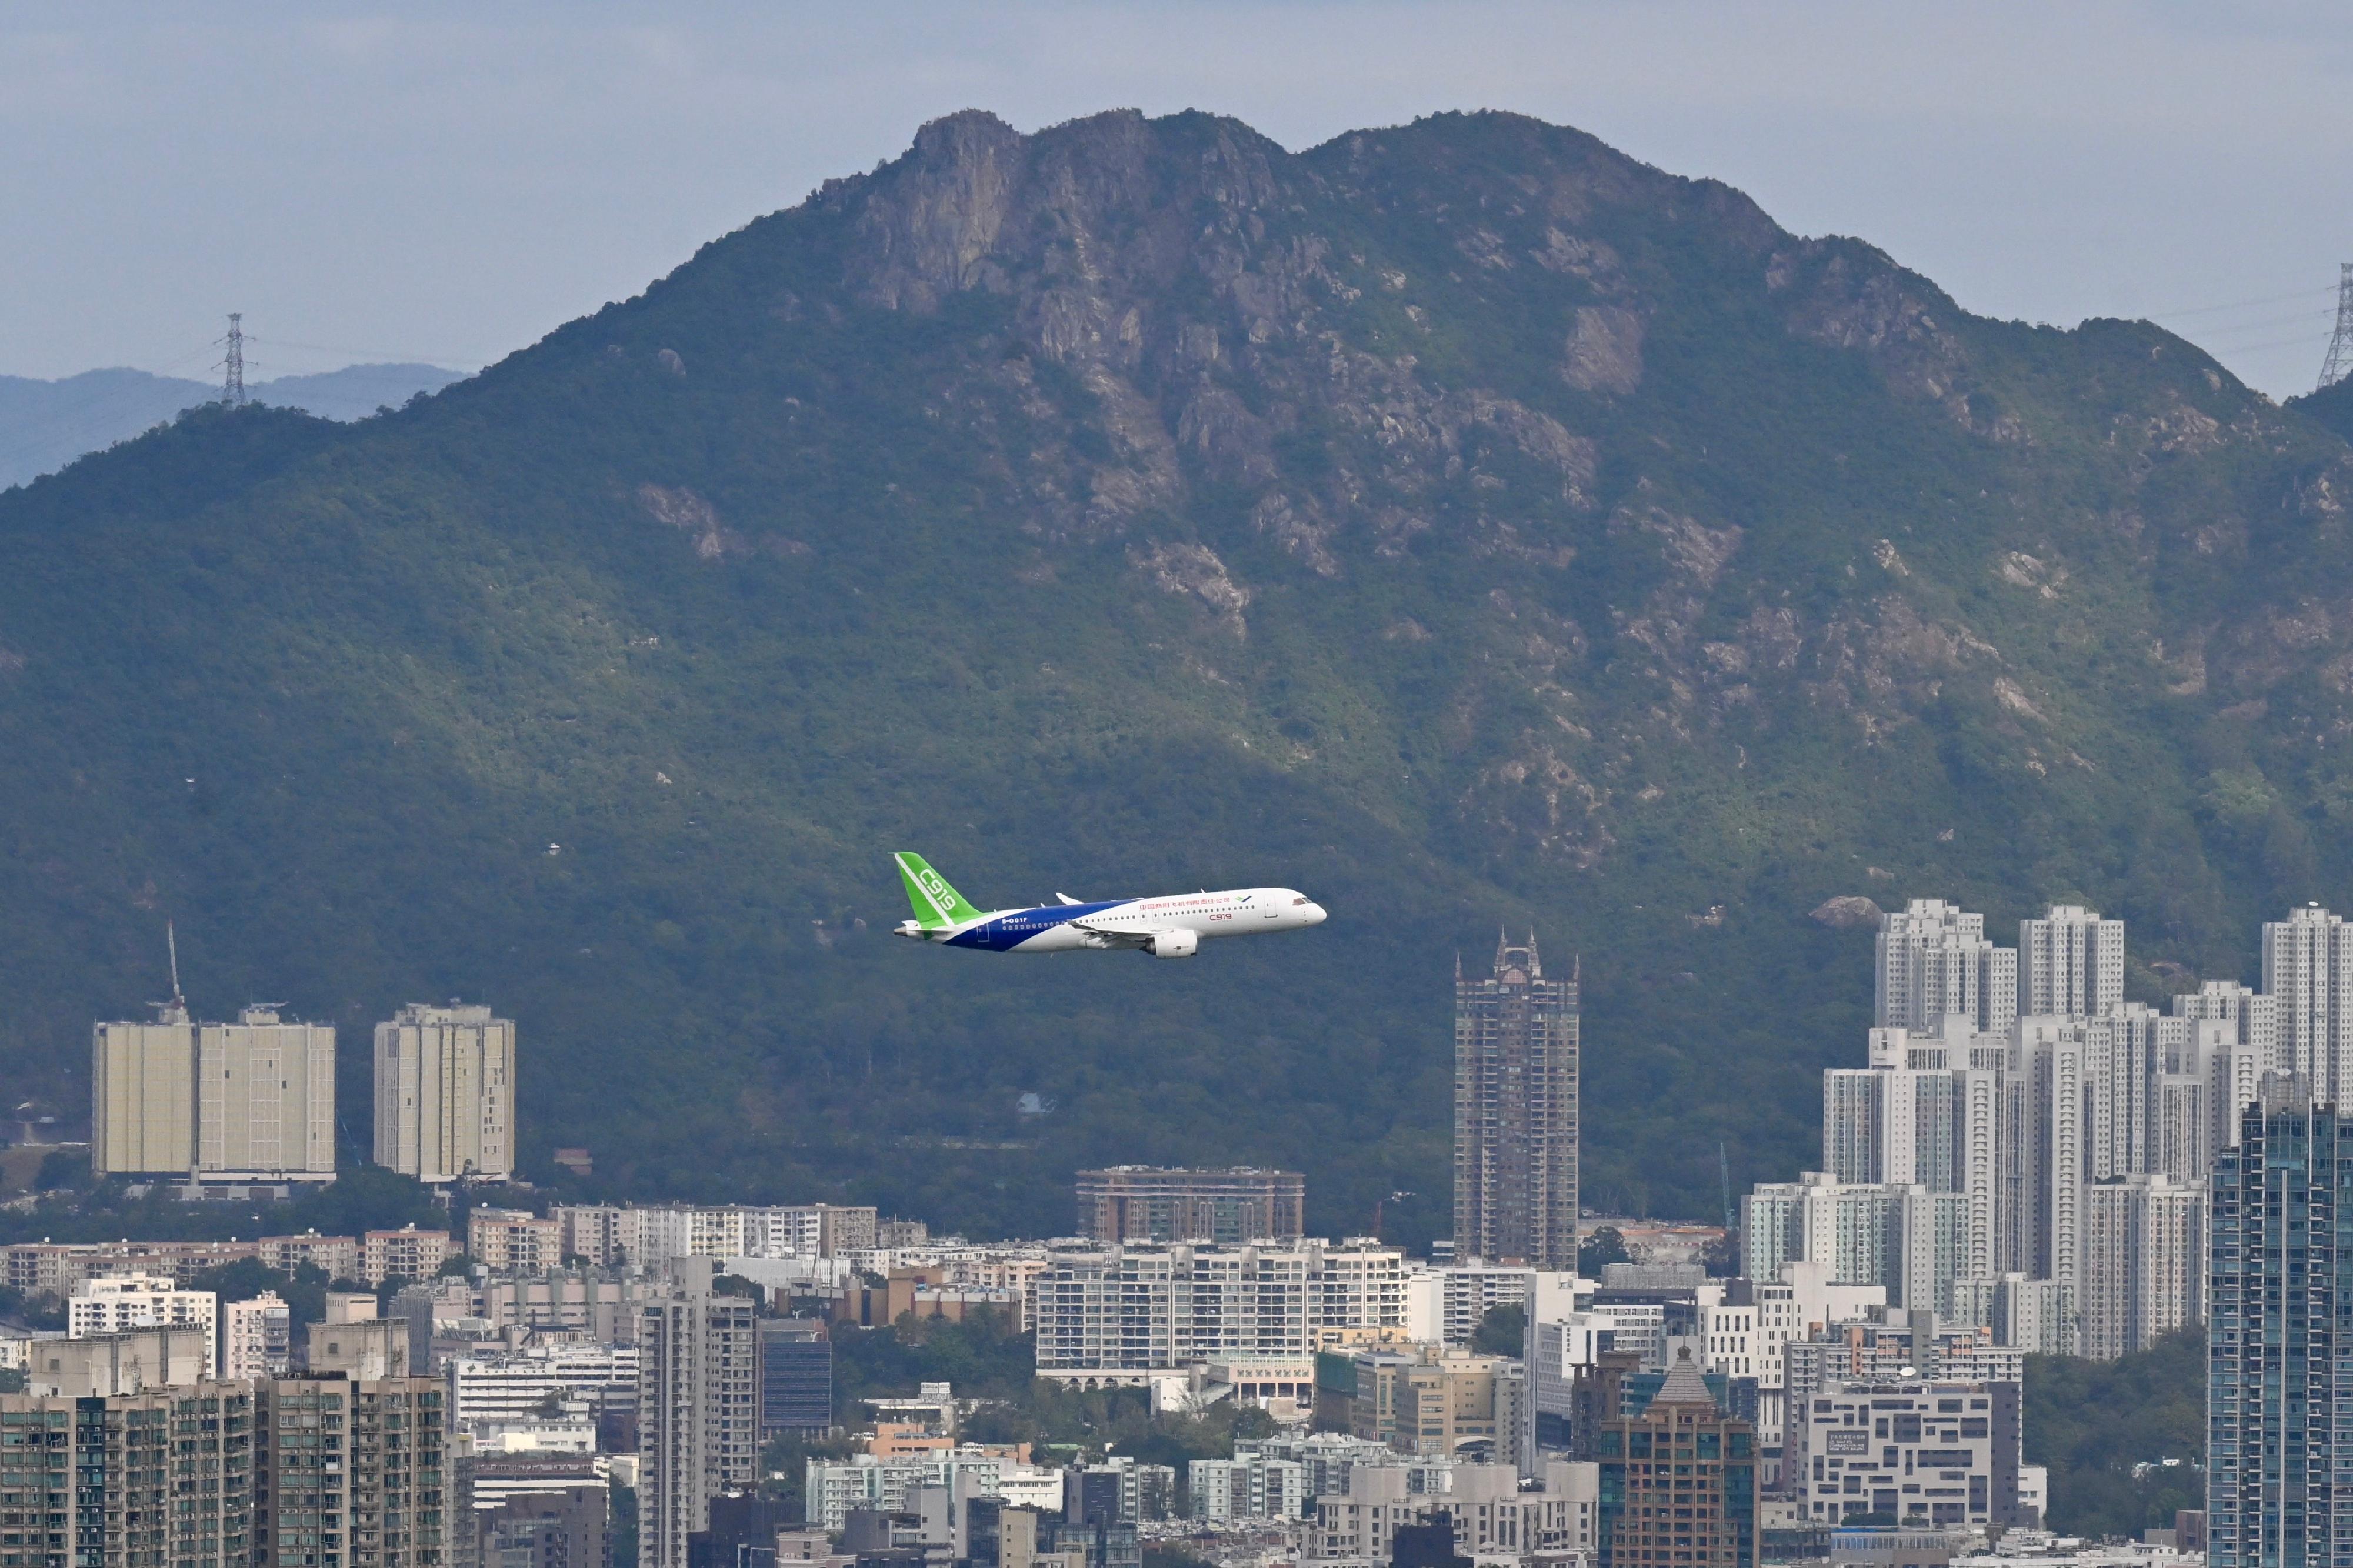 The flight demonstration of home-grown aircraft C919 concluded successfully this morning (December 16). Photo shows the C919 aircraft is flying around Hong Kong Island.